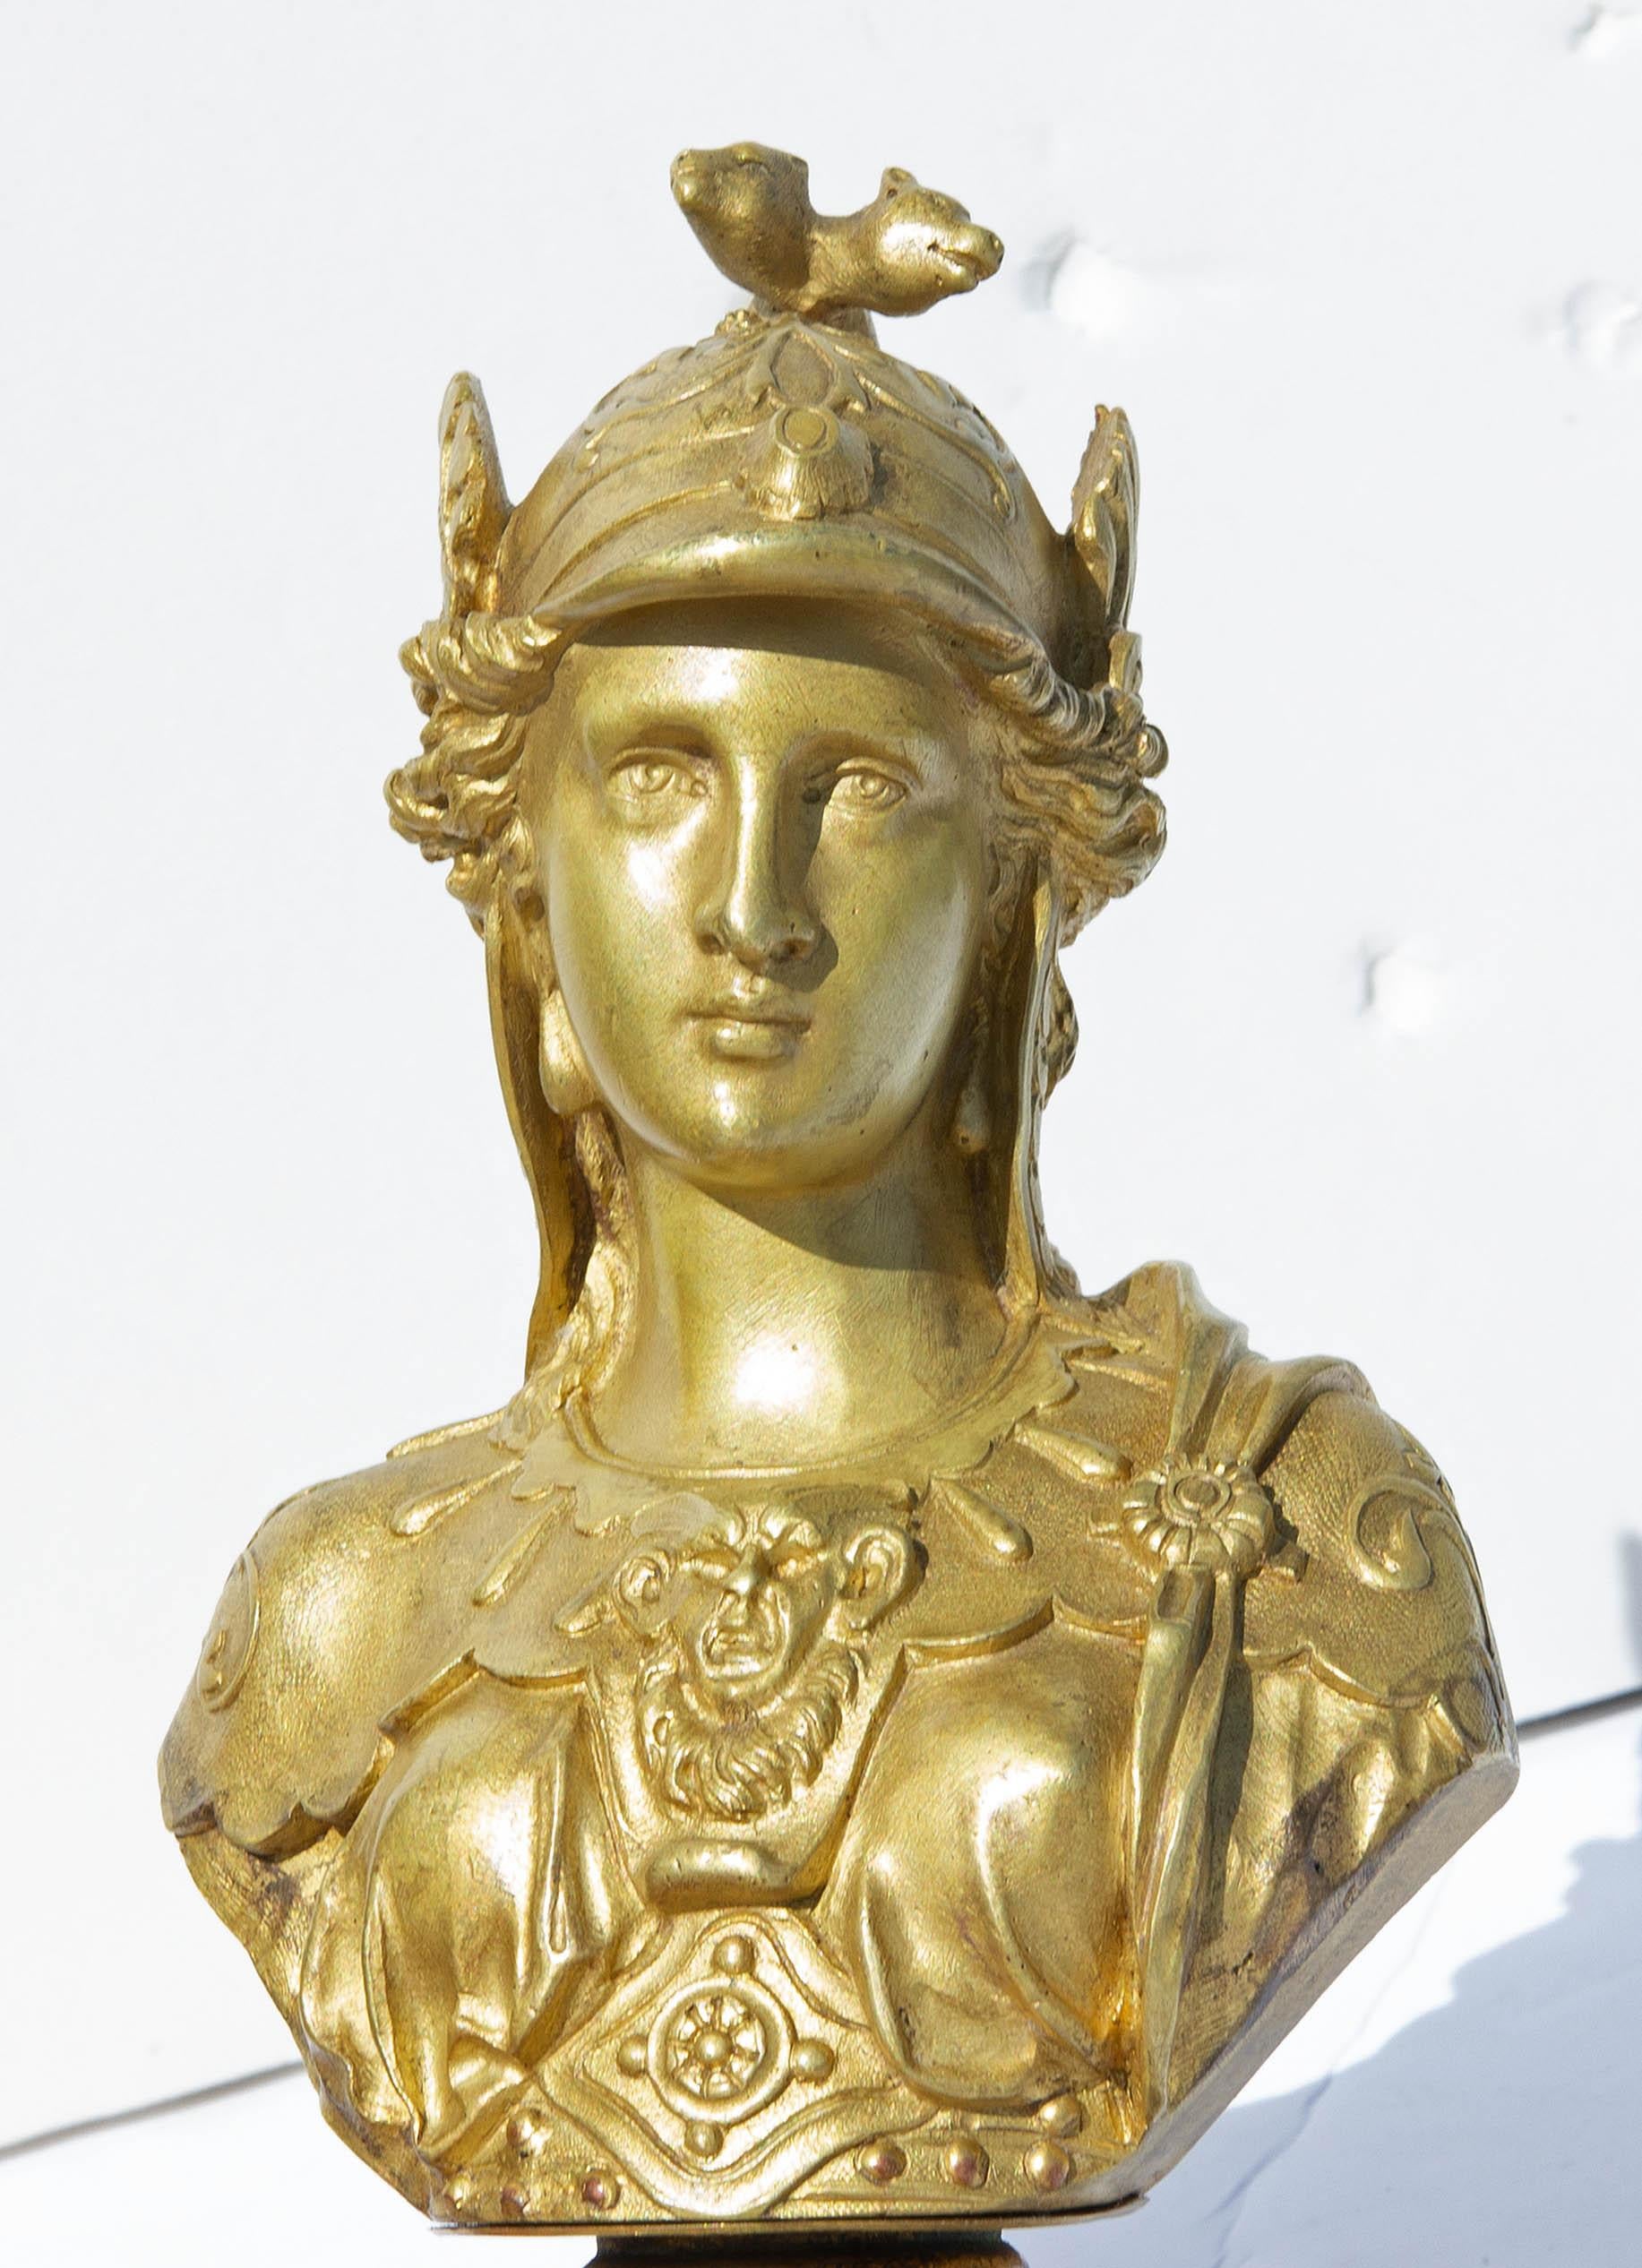 Antique French gilt bronze bust of Joan of Arc.